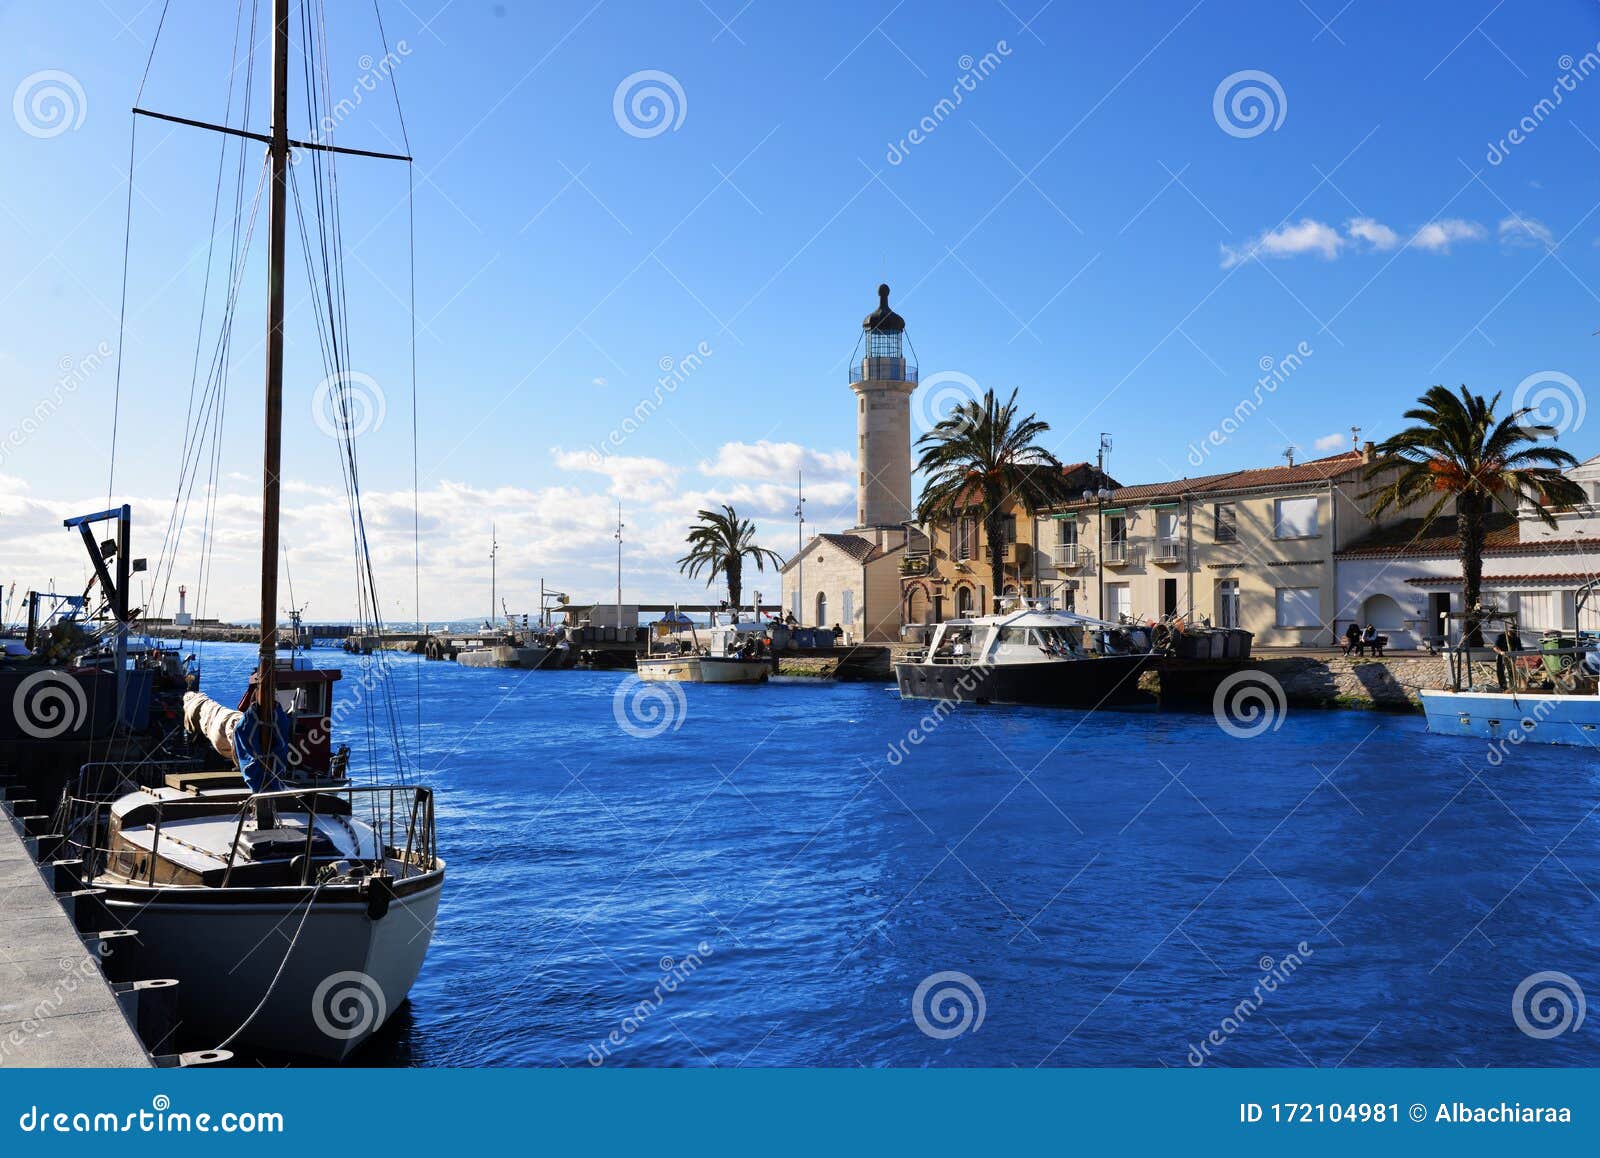 lighthouse and old fishing port of grau du roi in camargue zoological nature reserve. south of france.